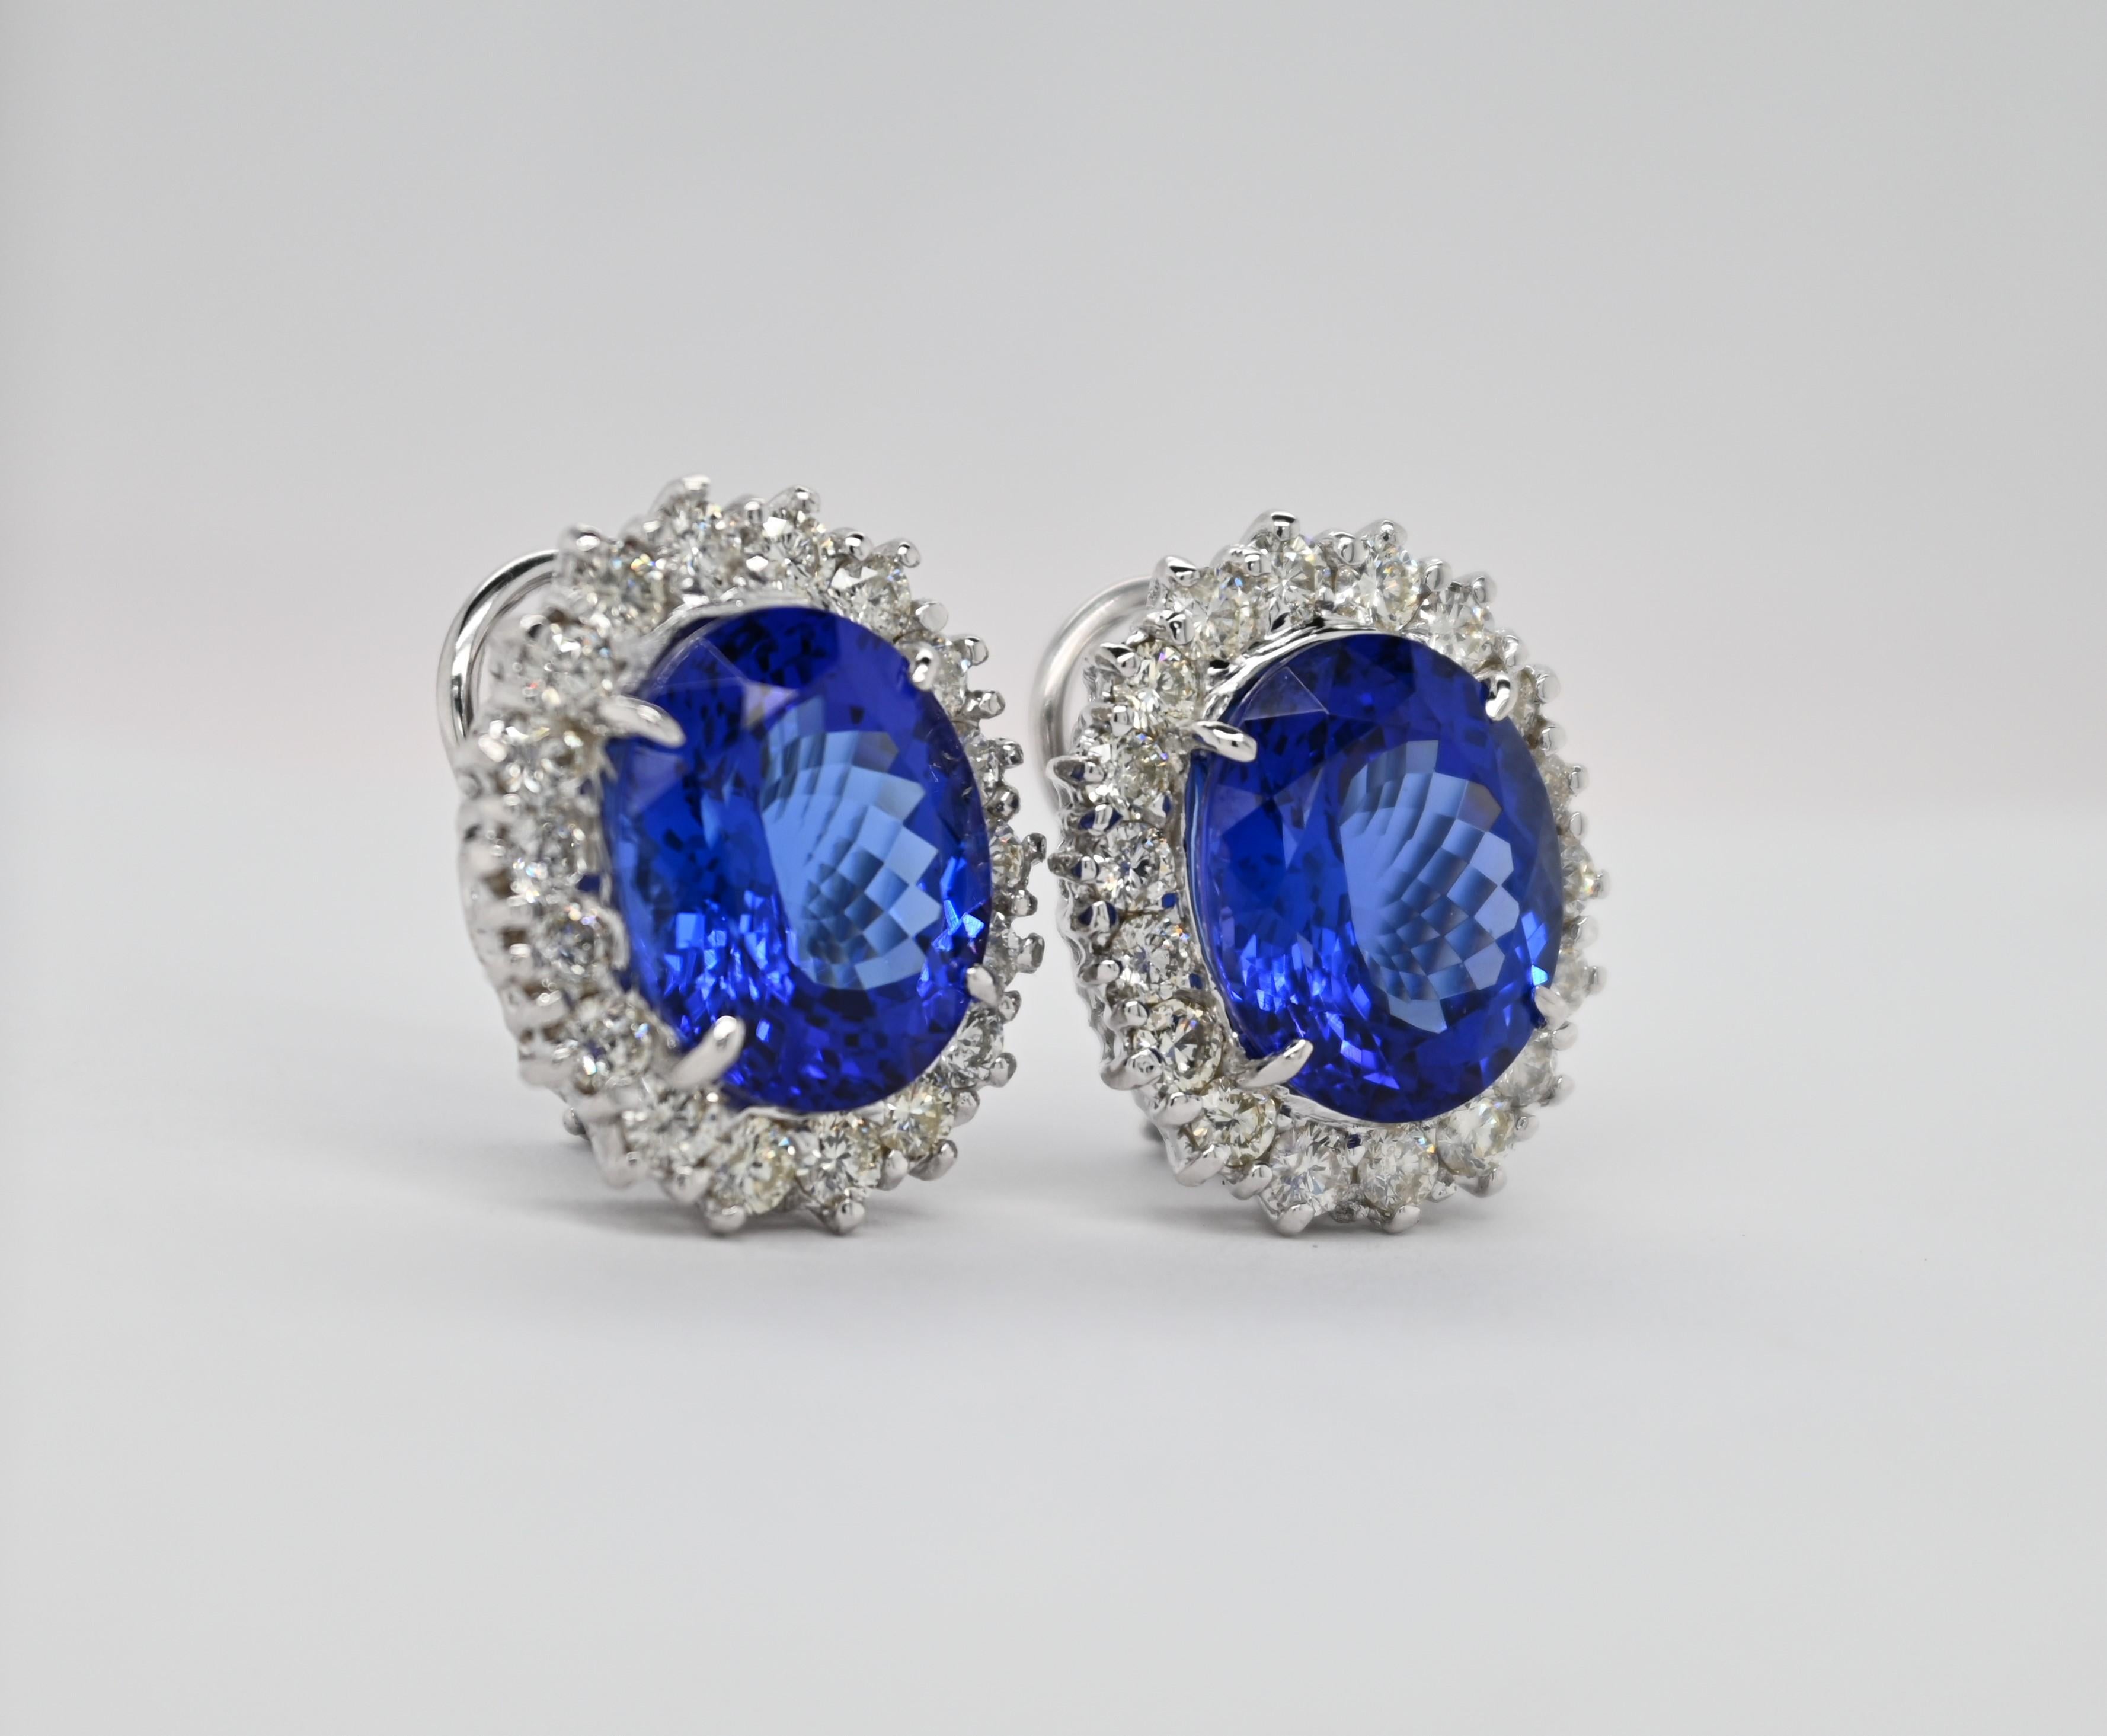 Magnum Creations original design, features 2.71 carats of white diamonds and 19.91 carats of tanzanite, mounted on a 14 karats white gold casting.

The glow of this earrings is impressive and eye catching.

Similar styles are available, visit our